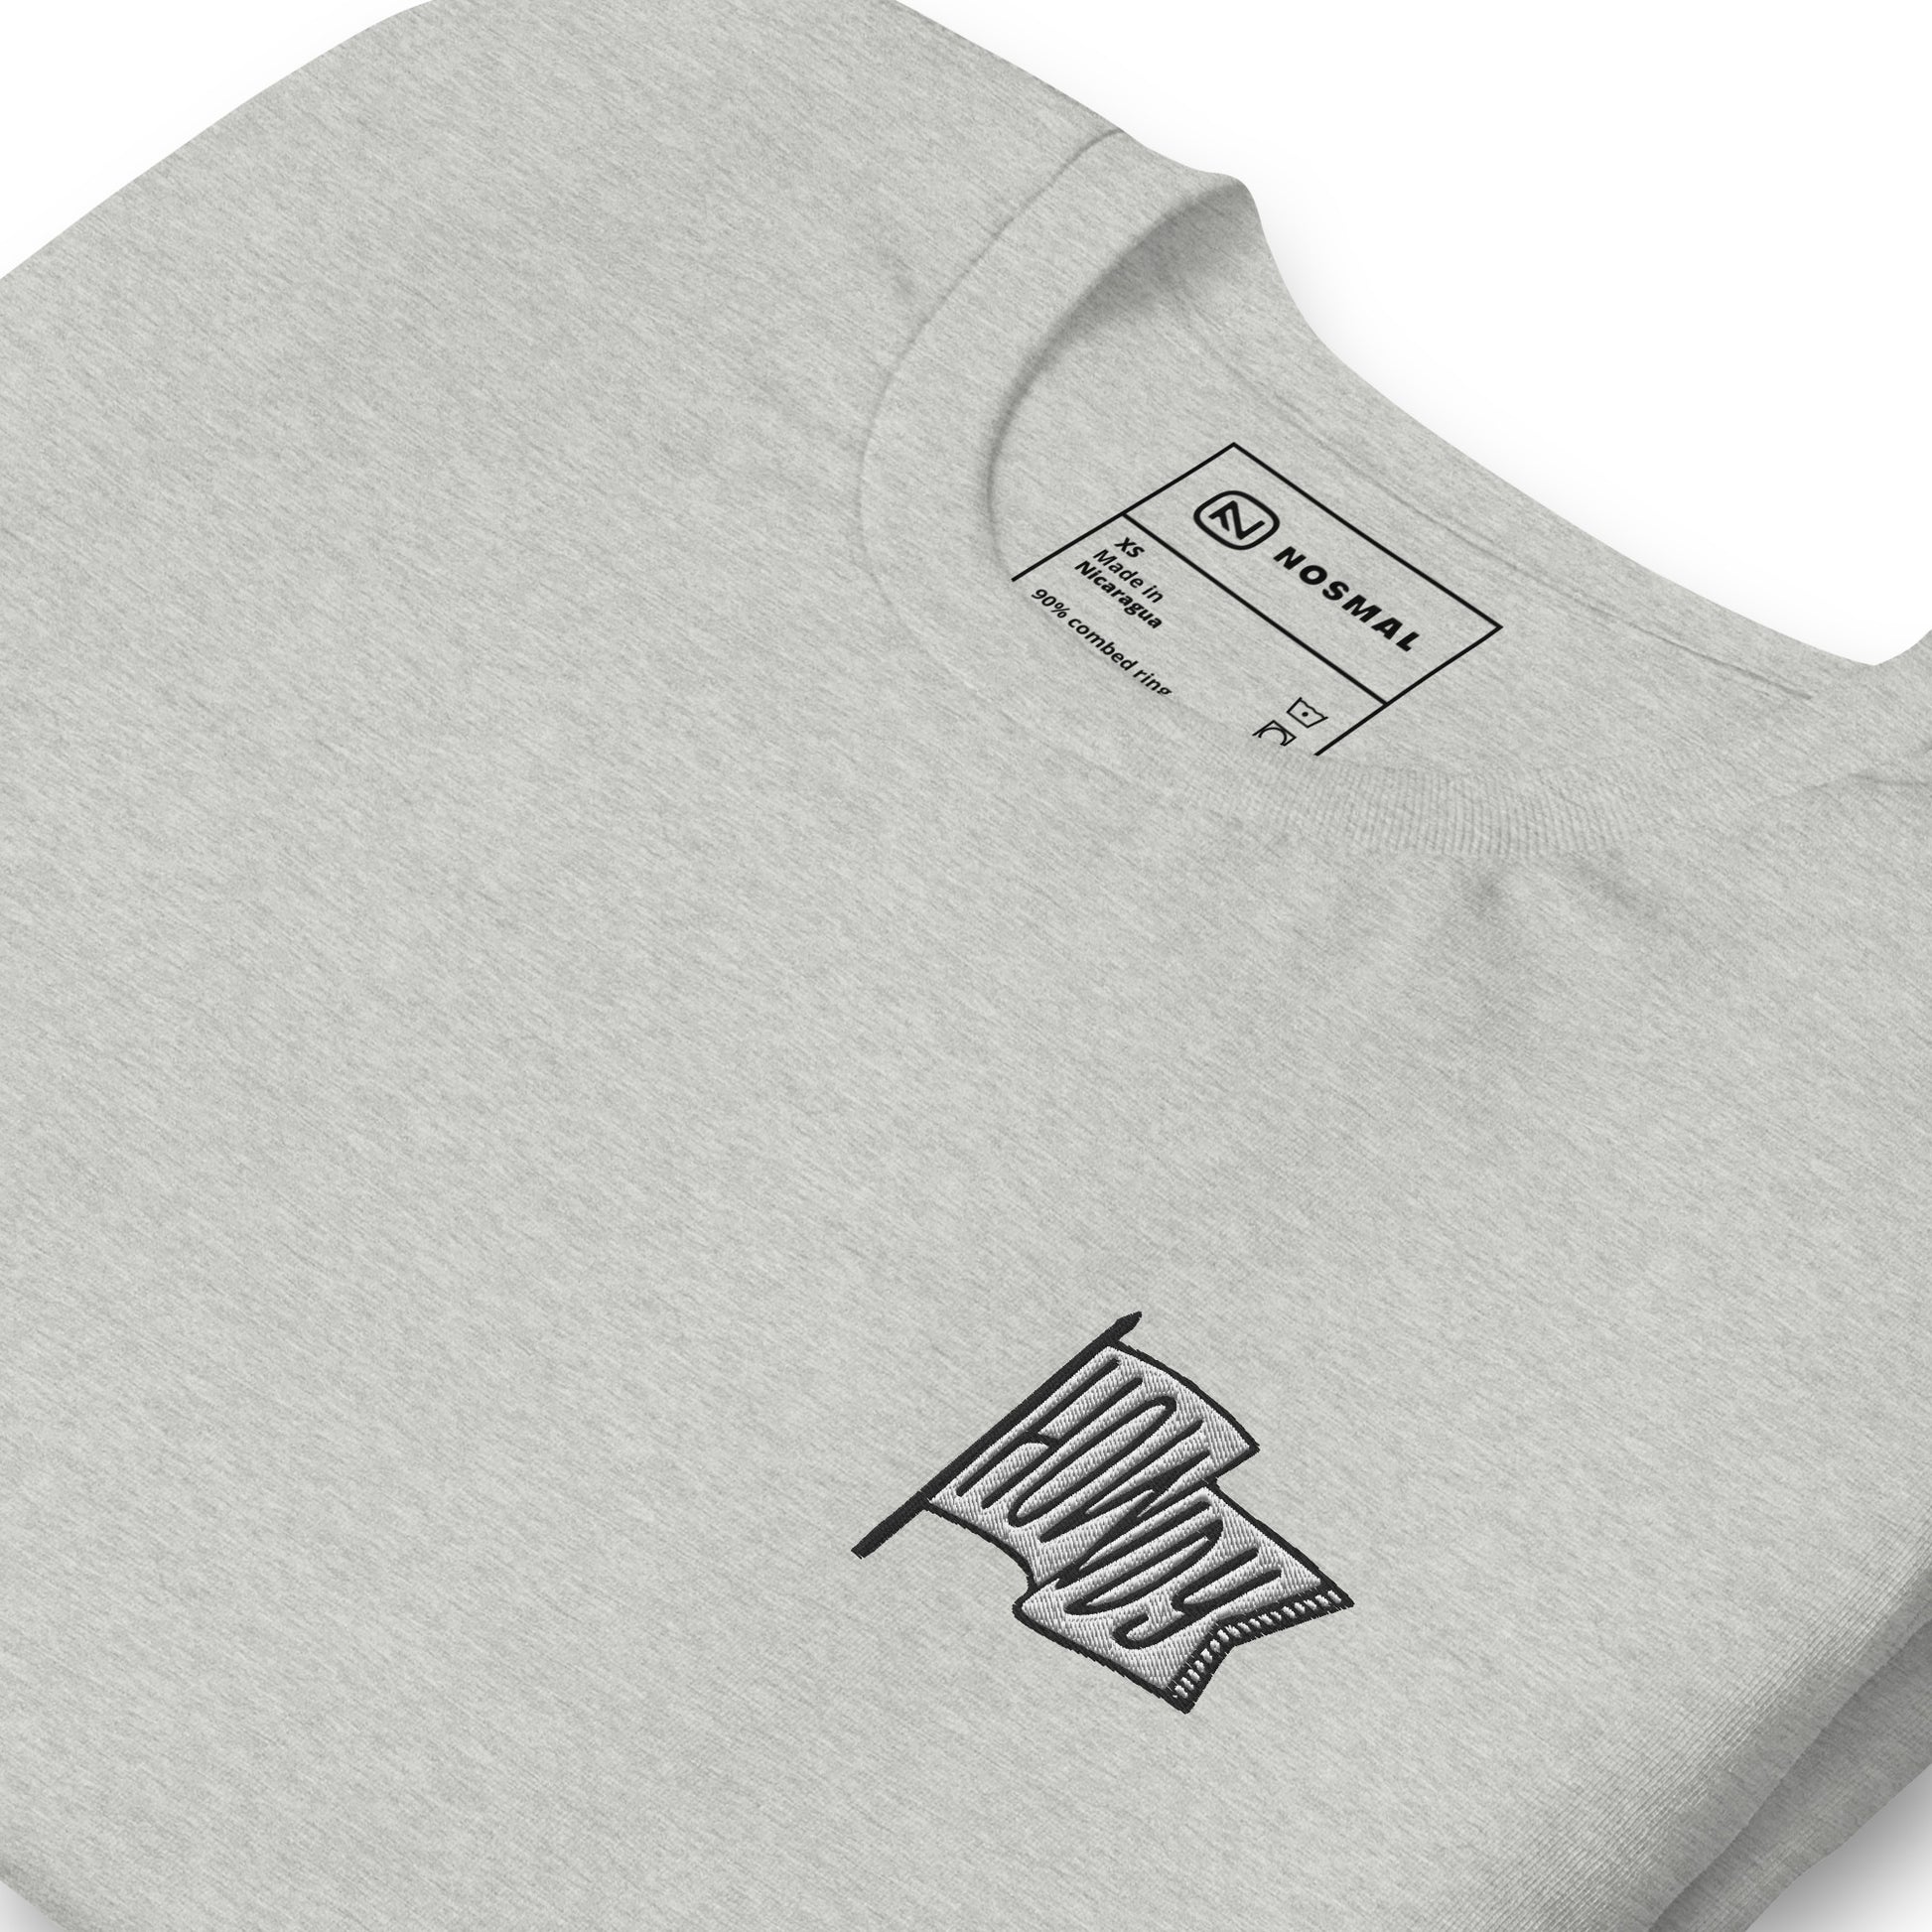 Angled close up howdy embroidered design on heather athletic grey unisex t-shirt.